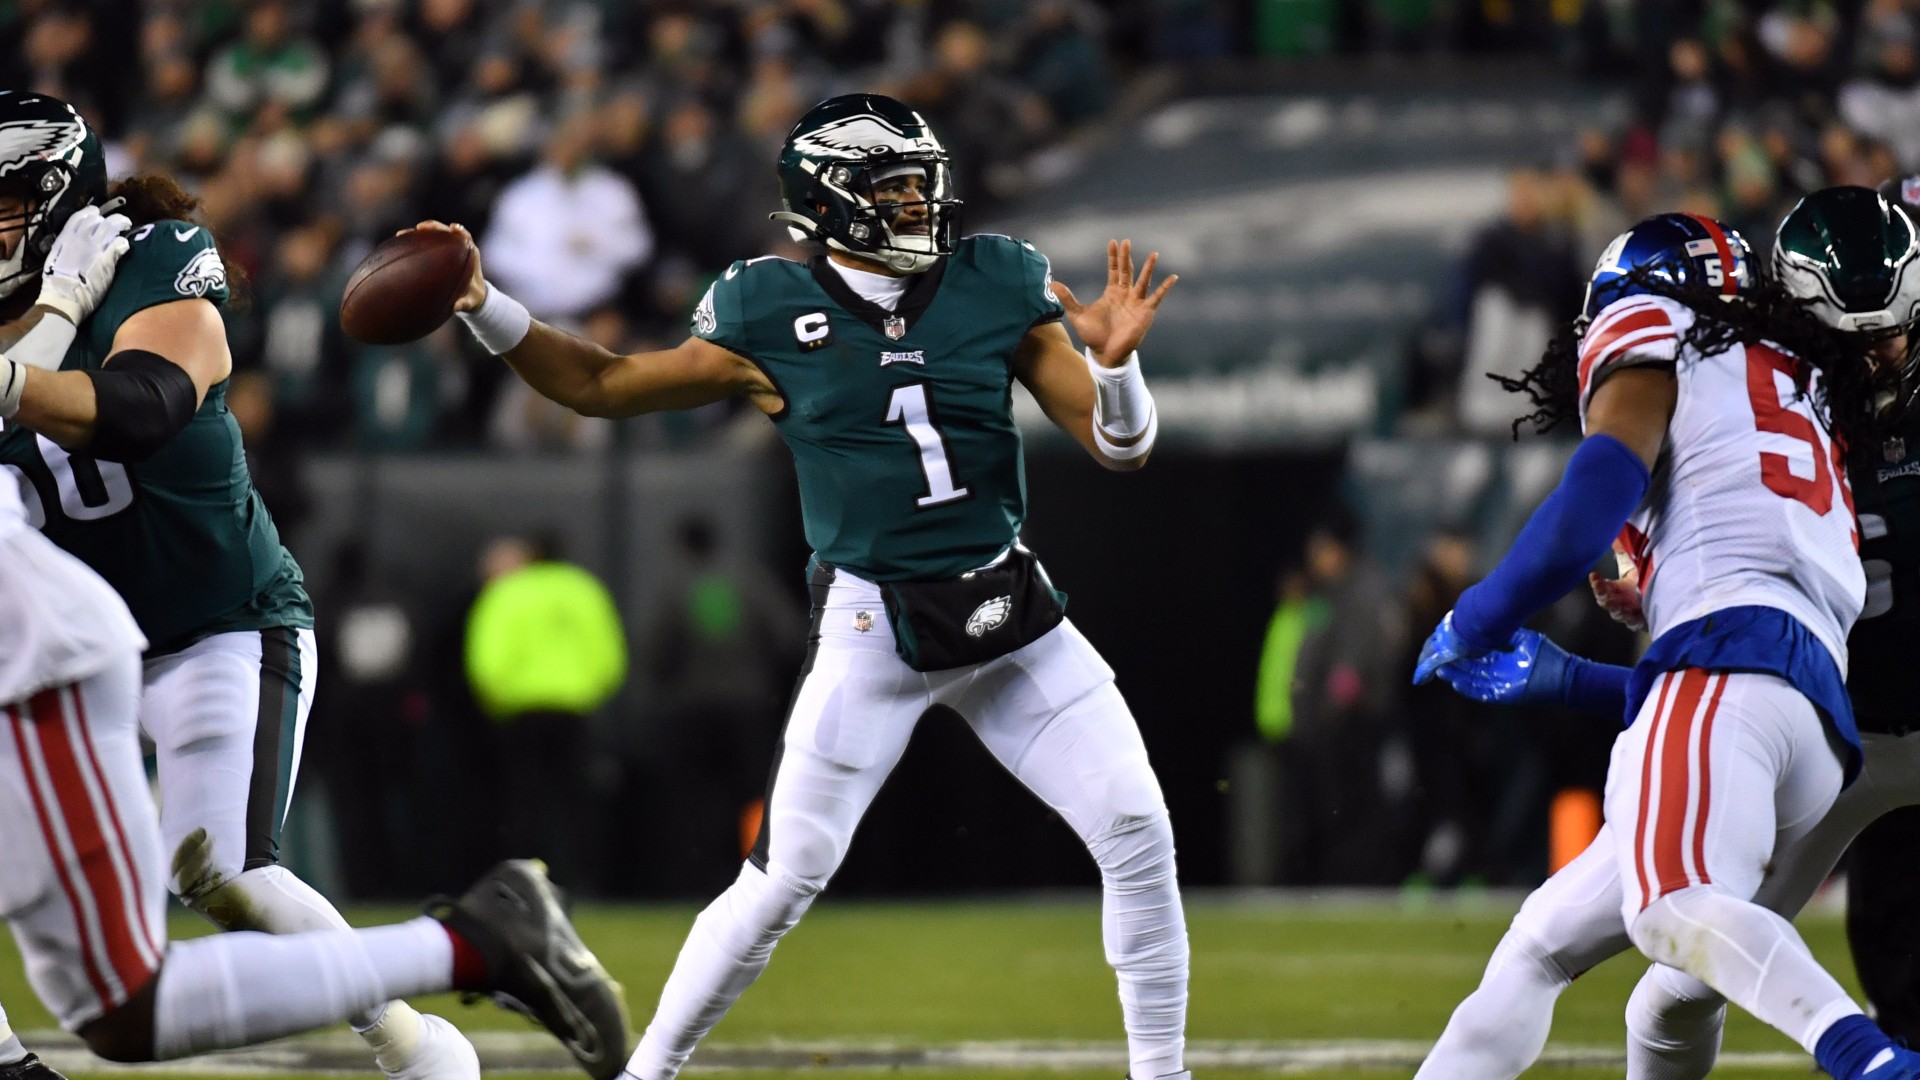 Giants-Eagles Divisional Round: NFL Playoffs live updates and score